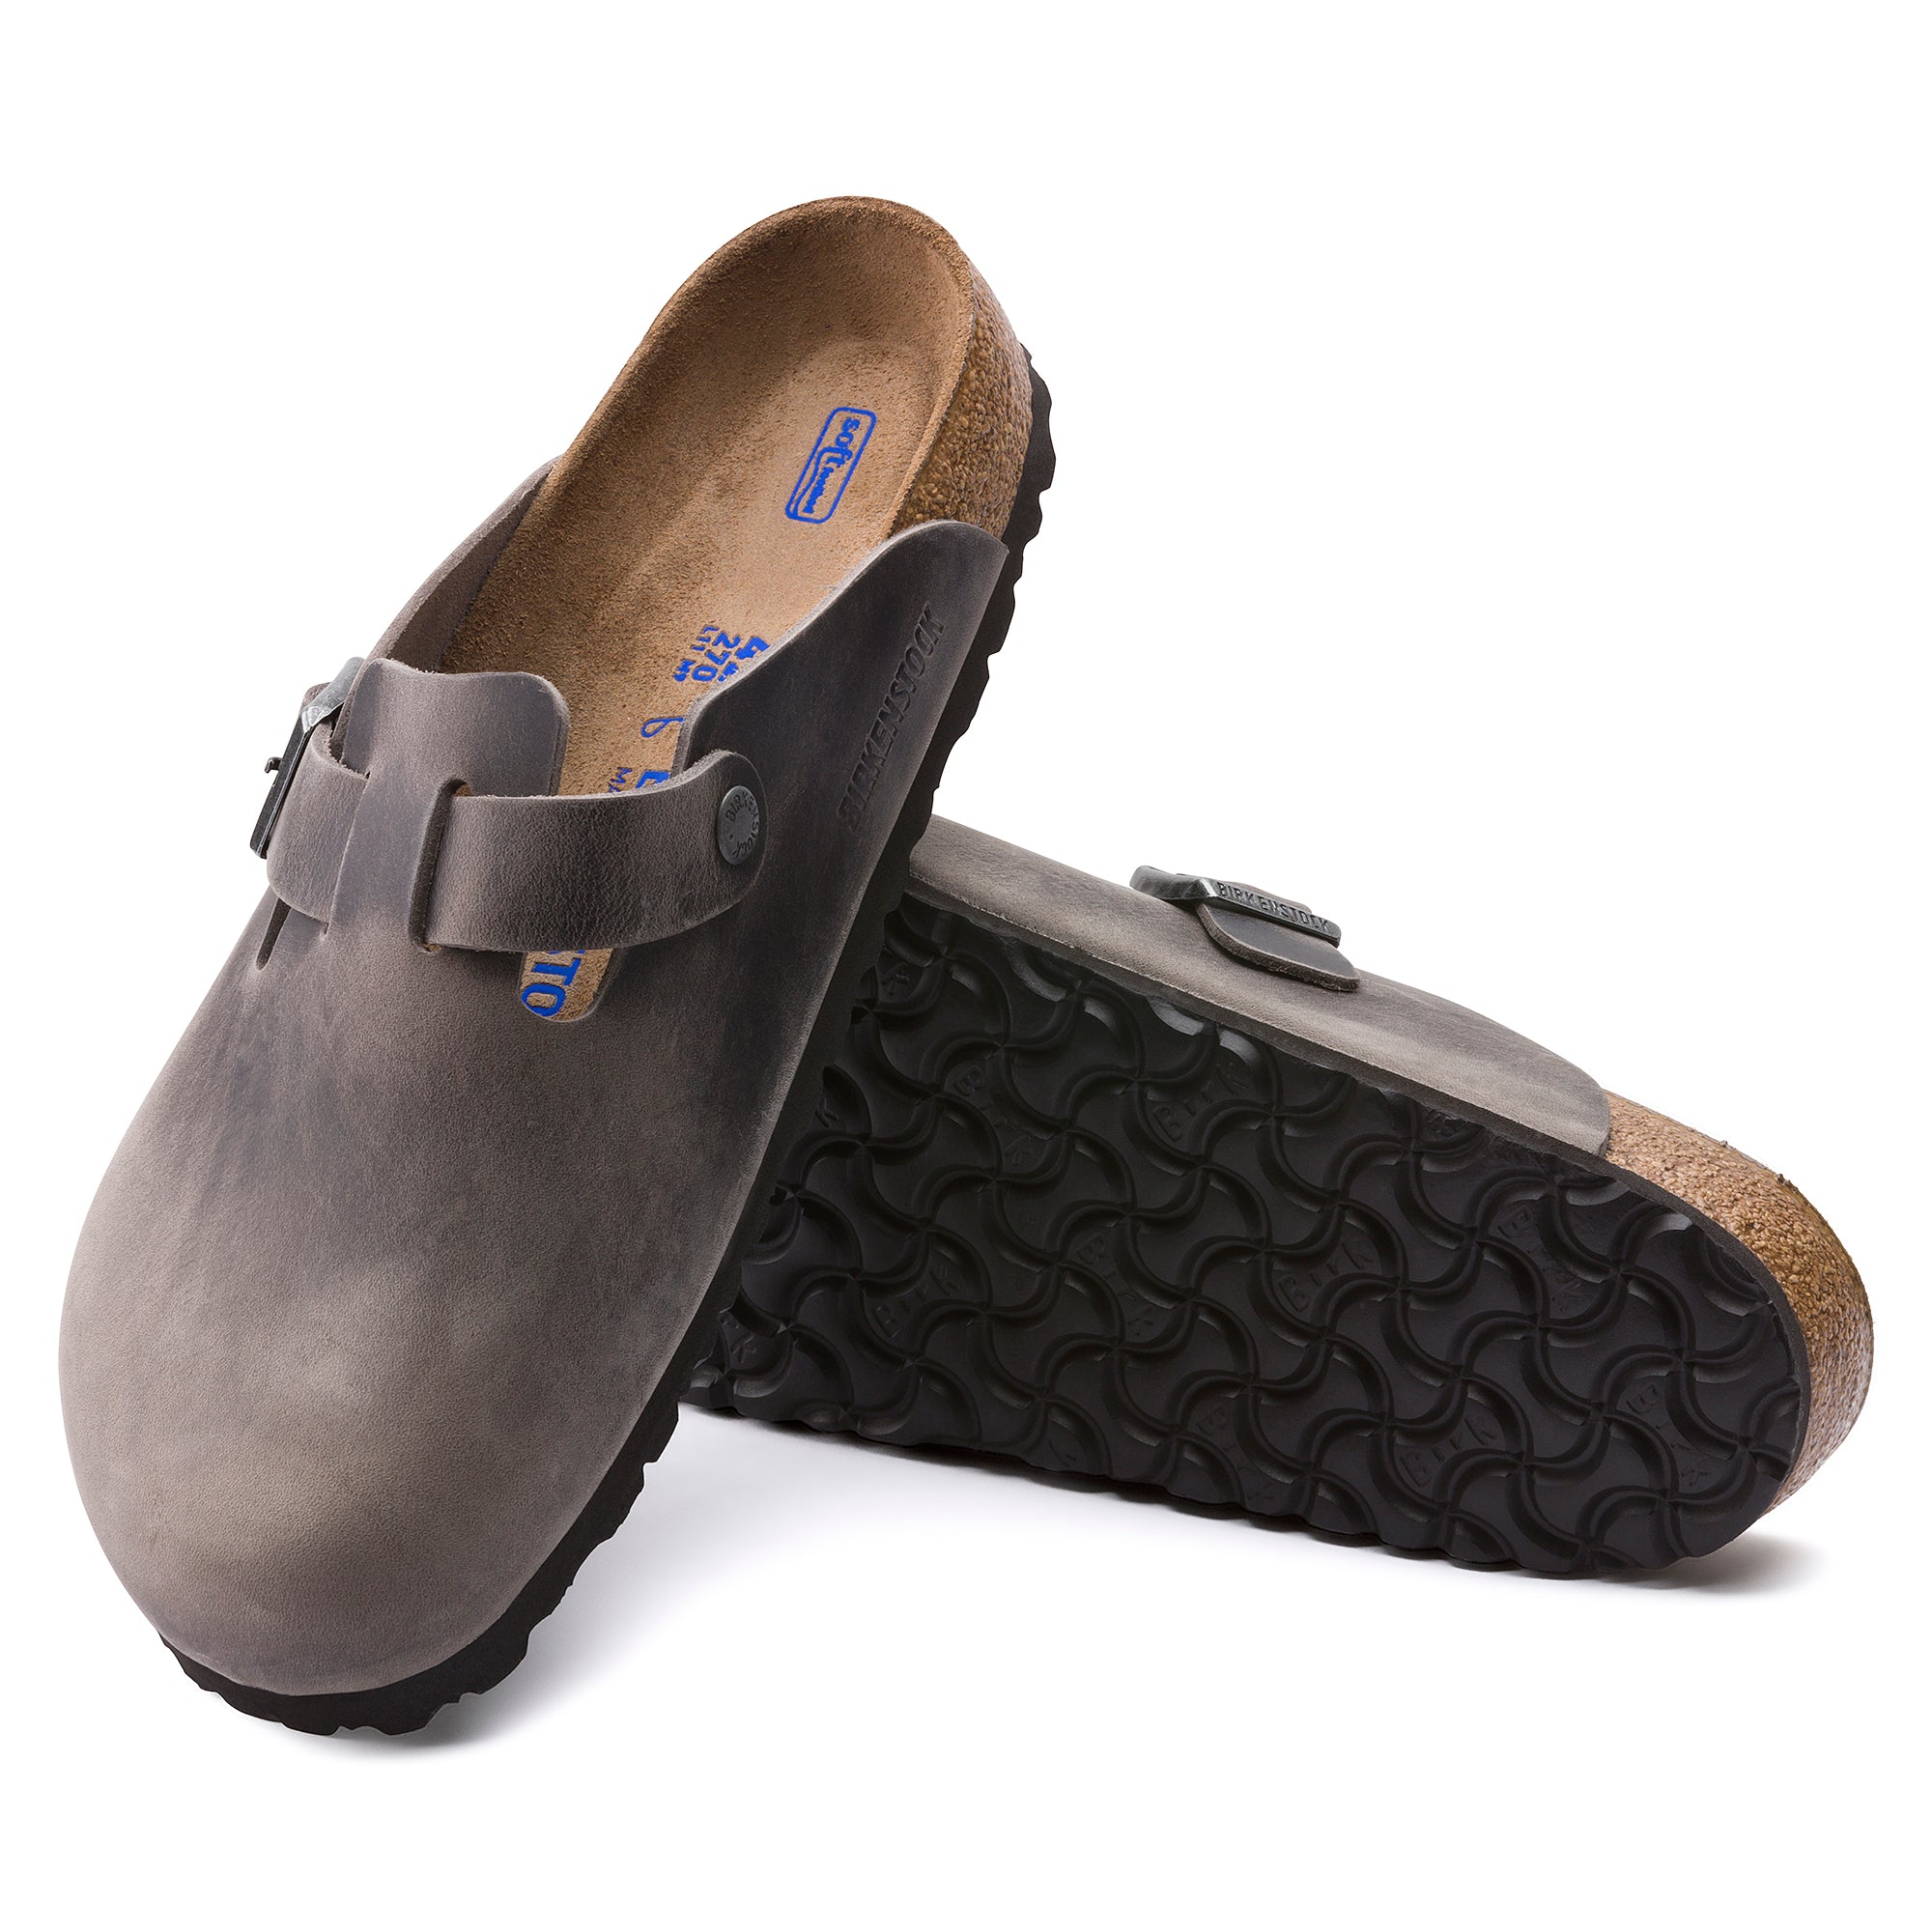 Birkenstock Boston Soft Footbed iron oiled leather